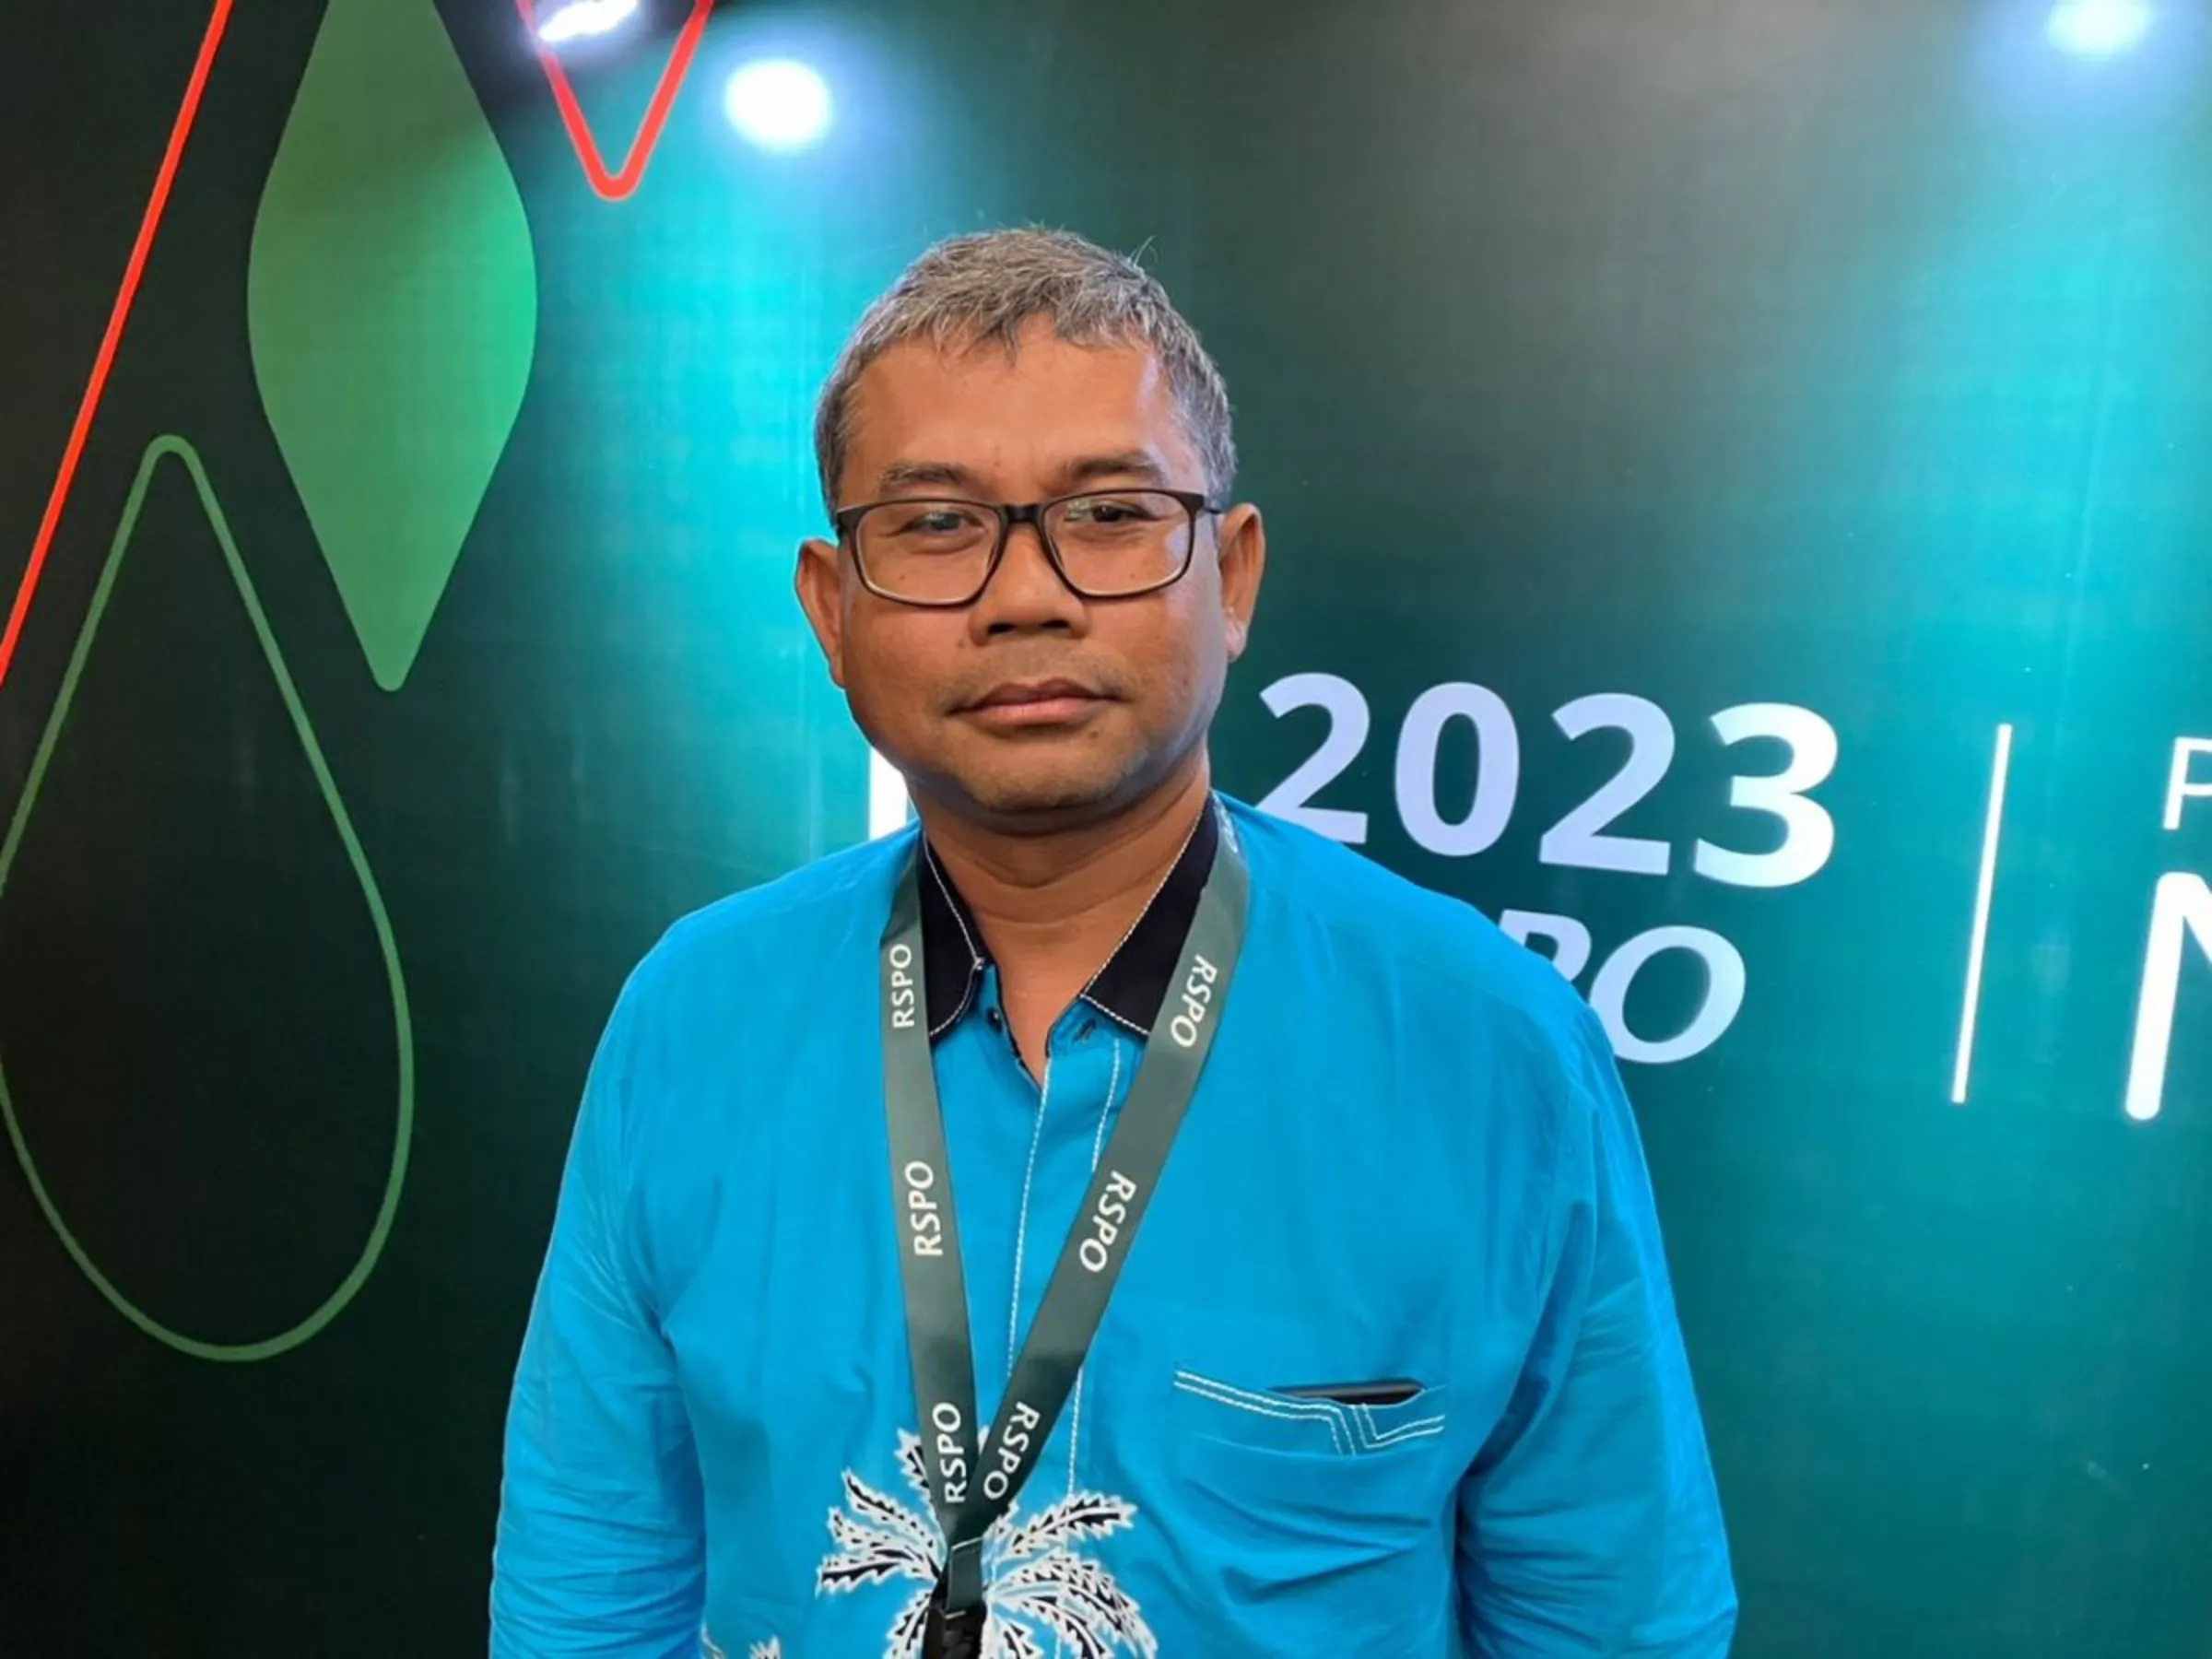 Joko Prasetyo, a smallholder palm oil farmer from the island of Sumatra at the RSPO conference in Jakarta, Indonesia, November 21, 2023